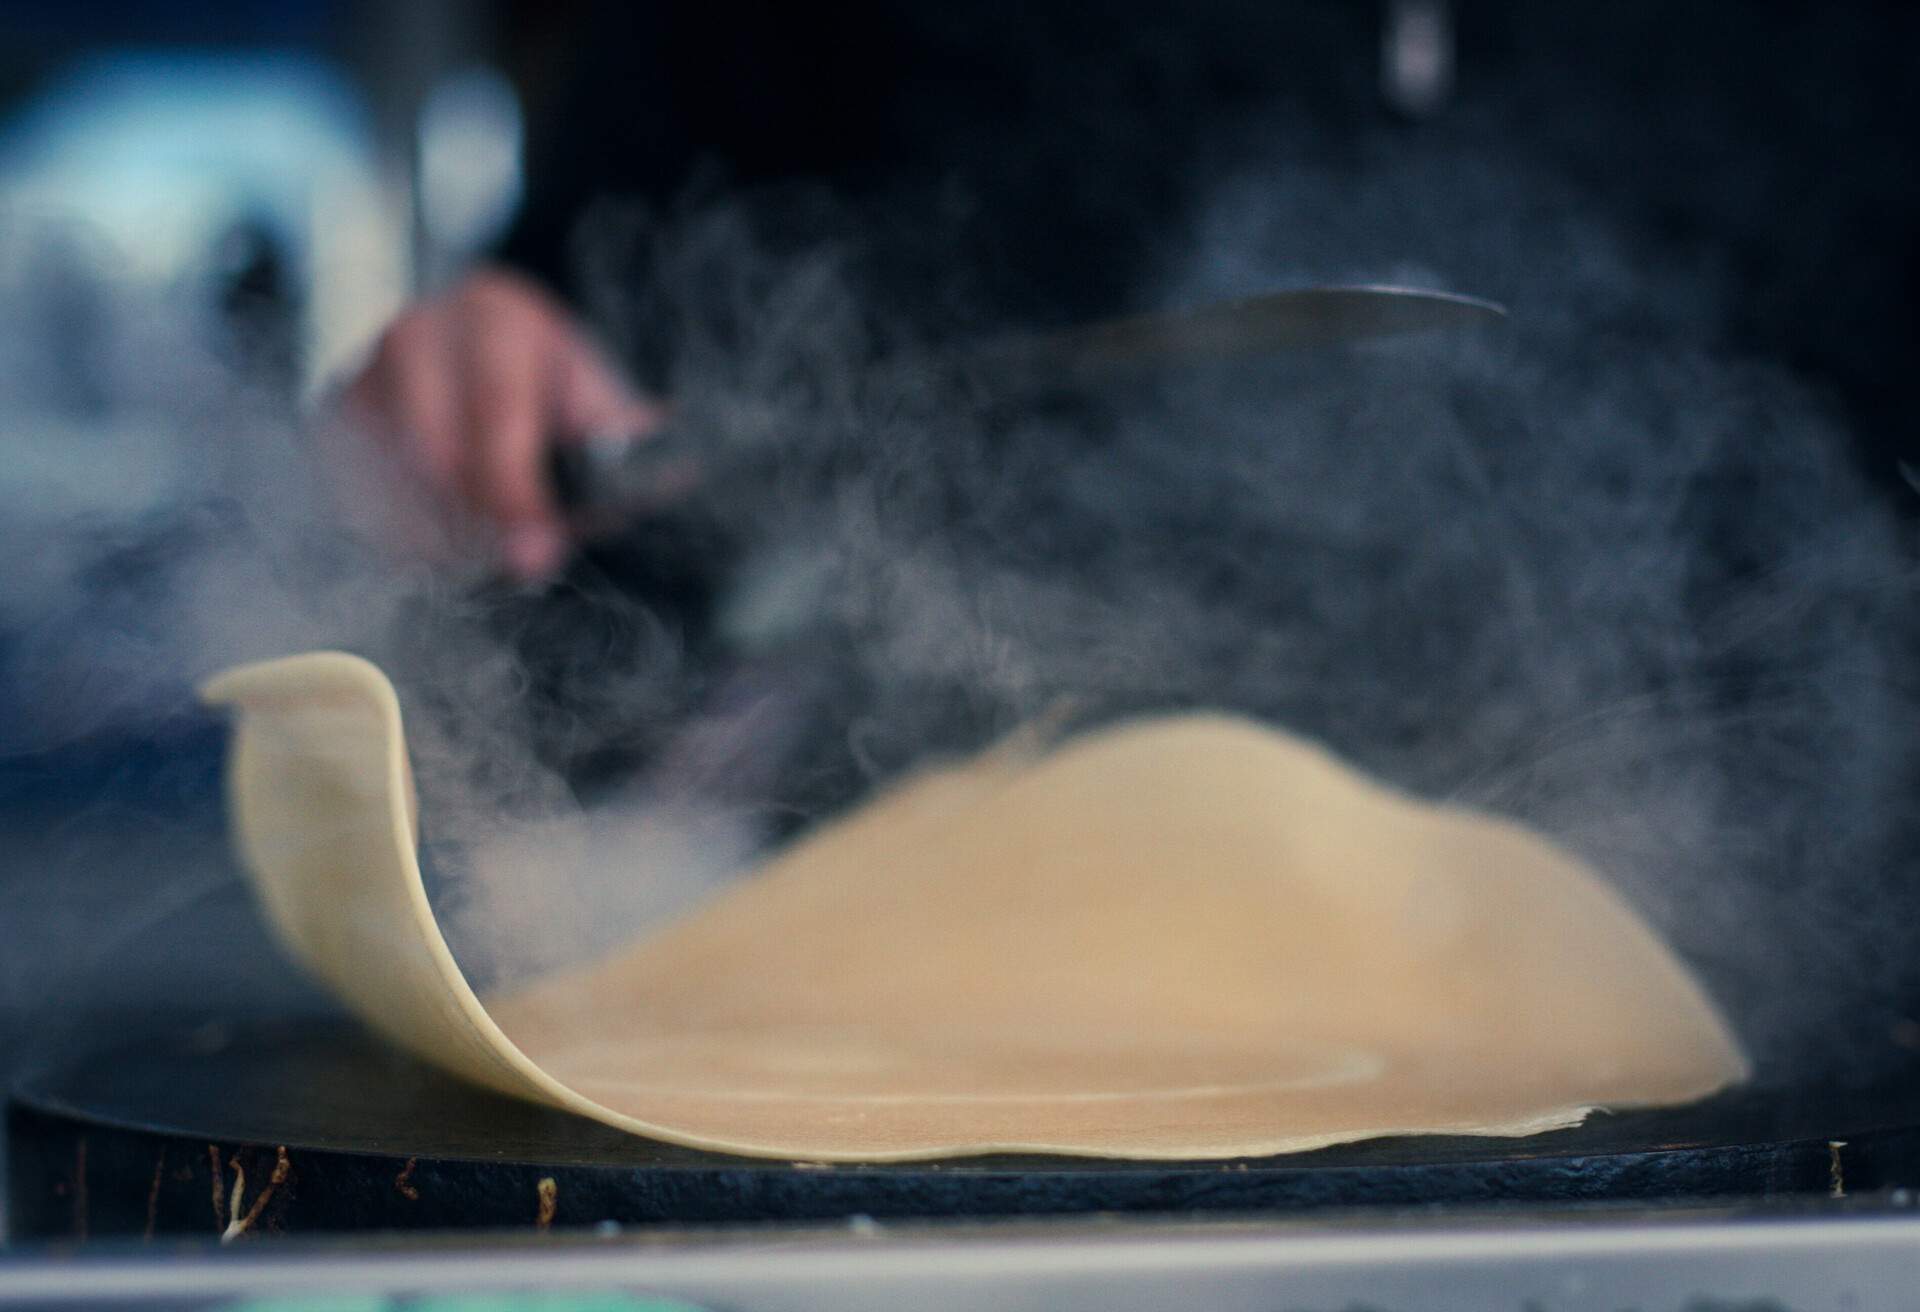 steaming while making crepes outside of the eiffel tower in Paris, France.